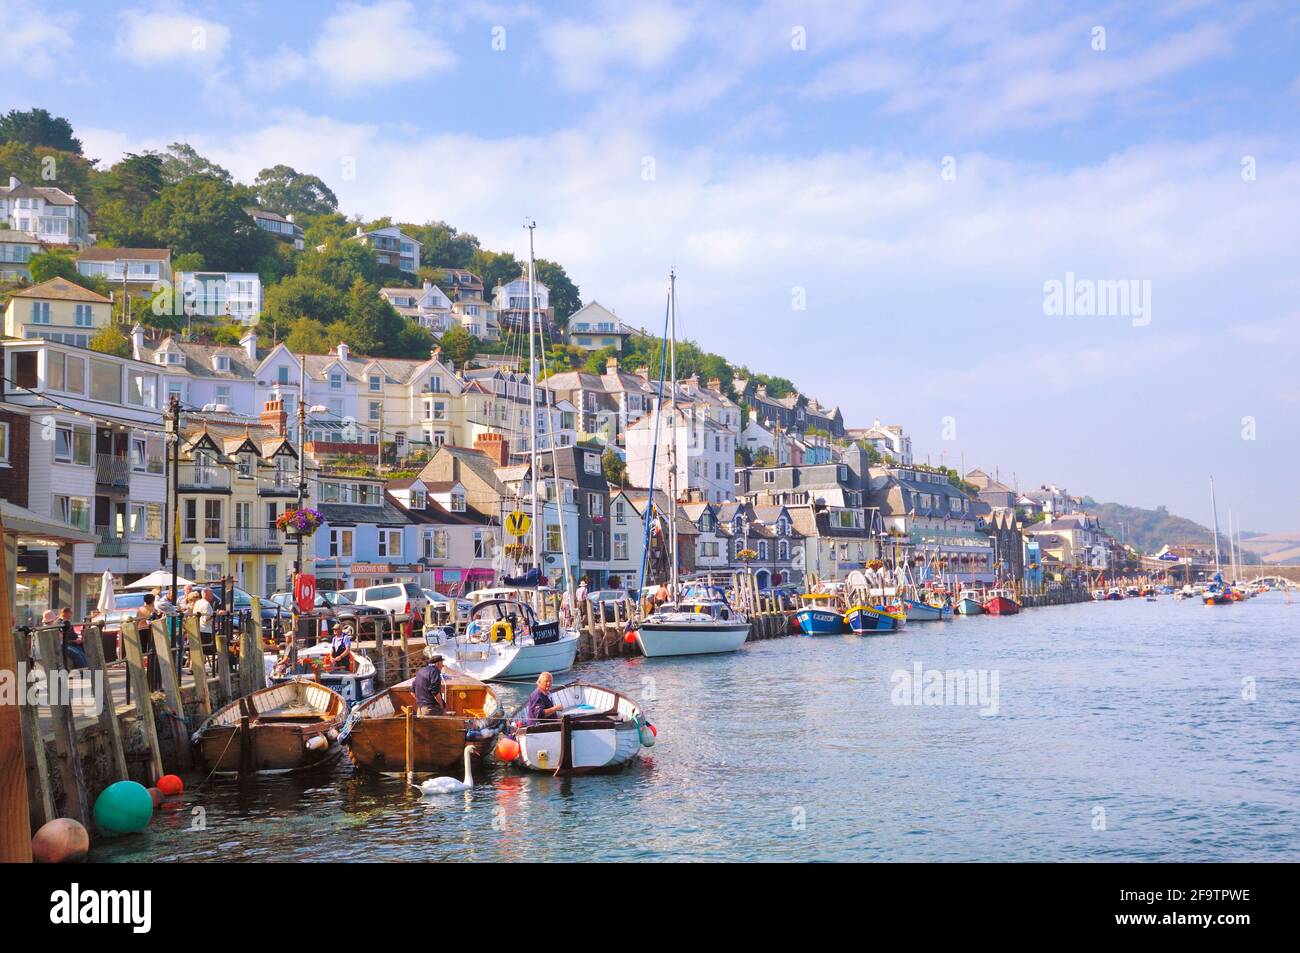 Hillside houses overlooking the harbour and boats along the River Looe, West Looe, Cornwall, England, UK Stock Photo